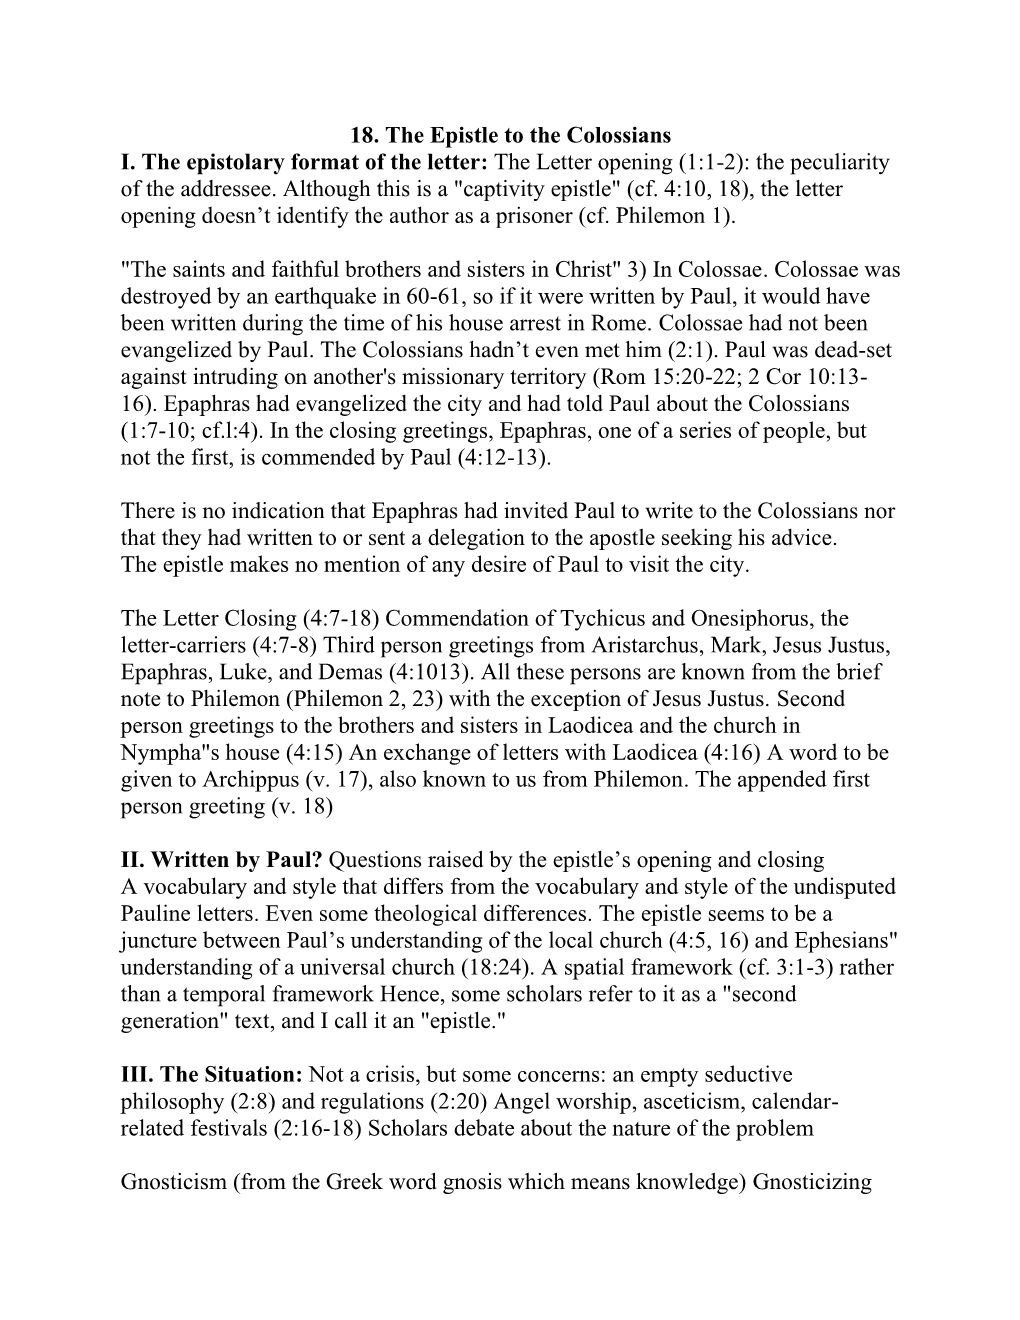 18. the Epistle to the Colossians I. the Epistolary Format of the Letter: the Letter Opening (1:1-2): the Peculiarity of the Addressee